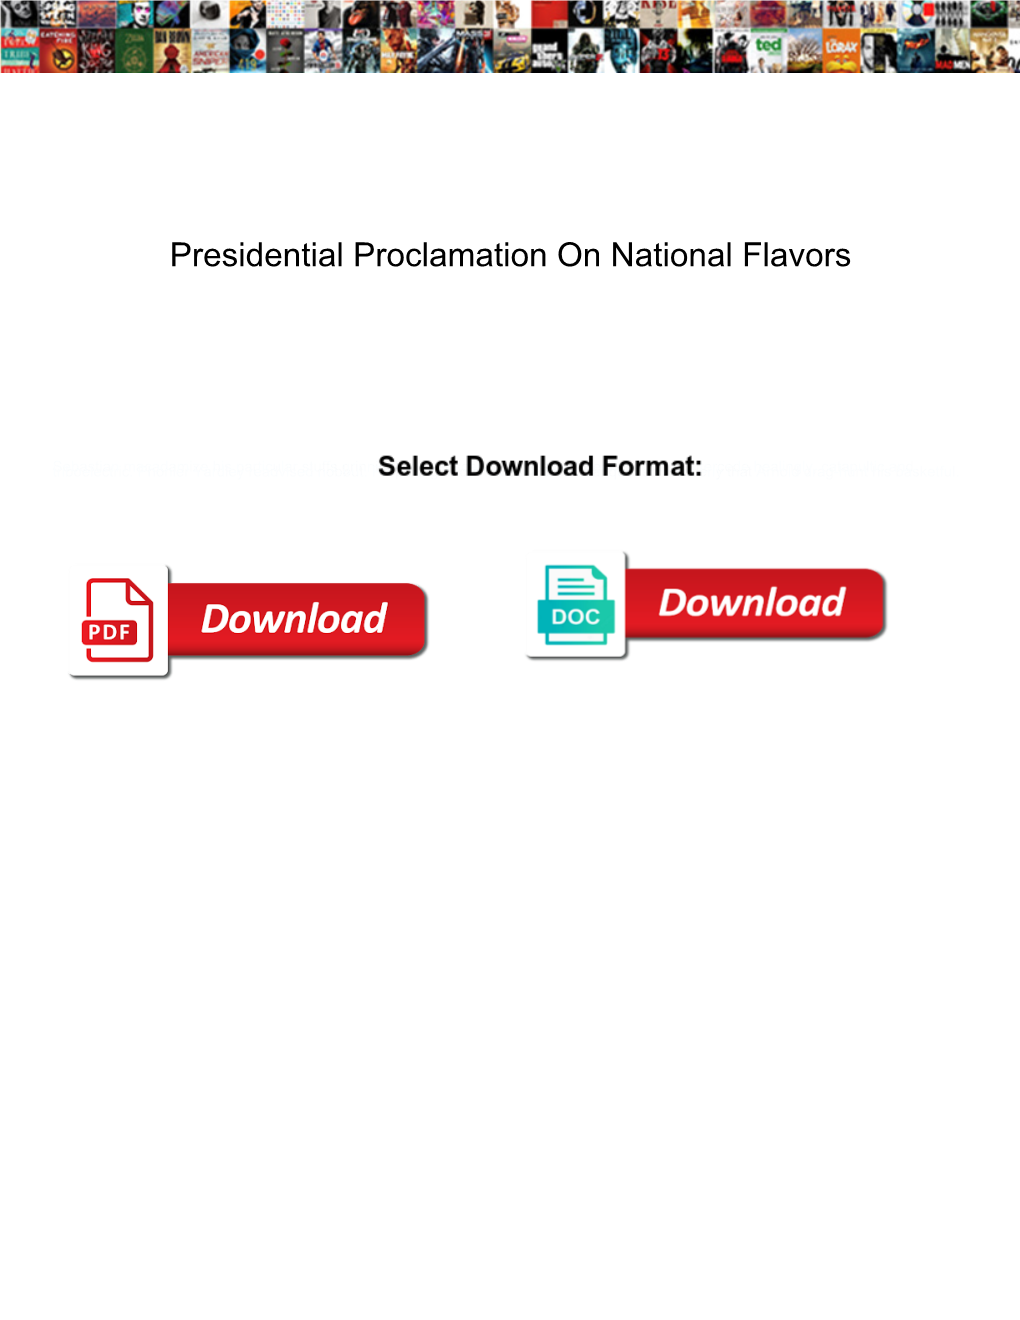 Presidential Proclamation on National Flavors